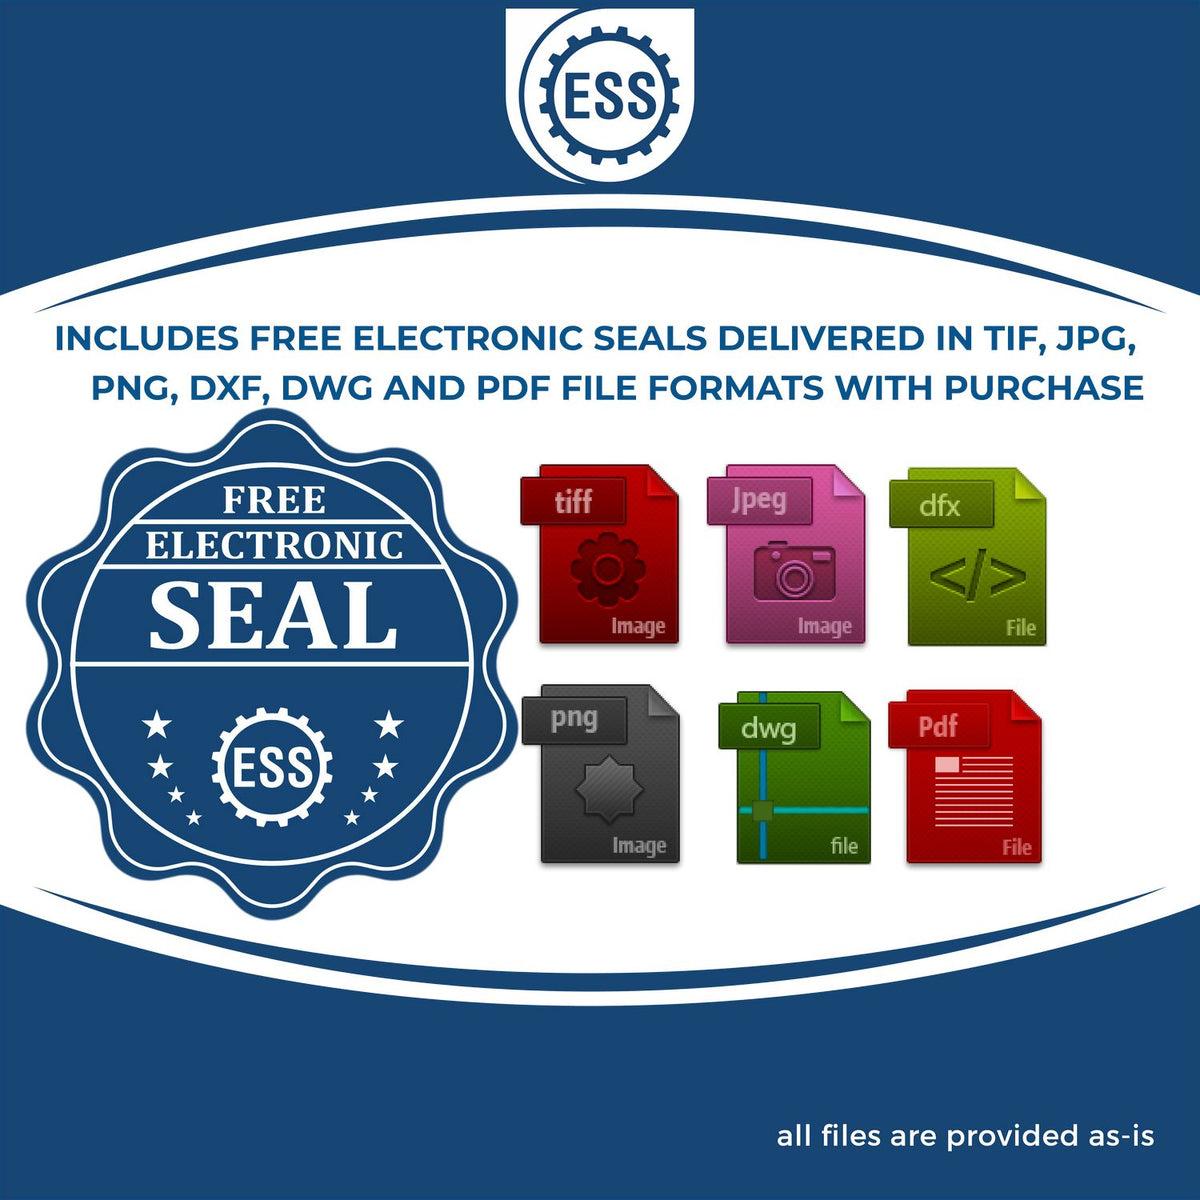 An infographic for the free electronic seal for the State of Tennessee Extended Long Reach Geologist Seal illustrating the different file type icons such as DXF, DWG, TIF, JPG and PNG.